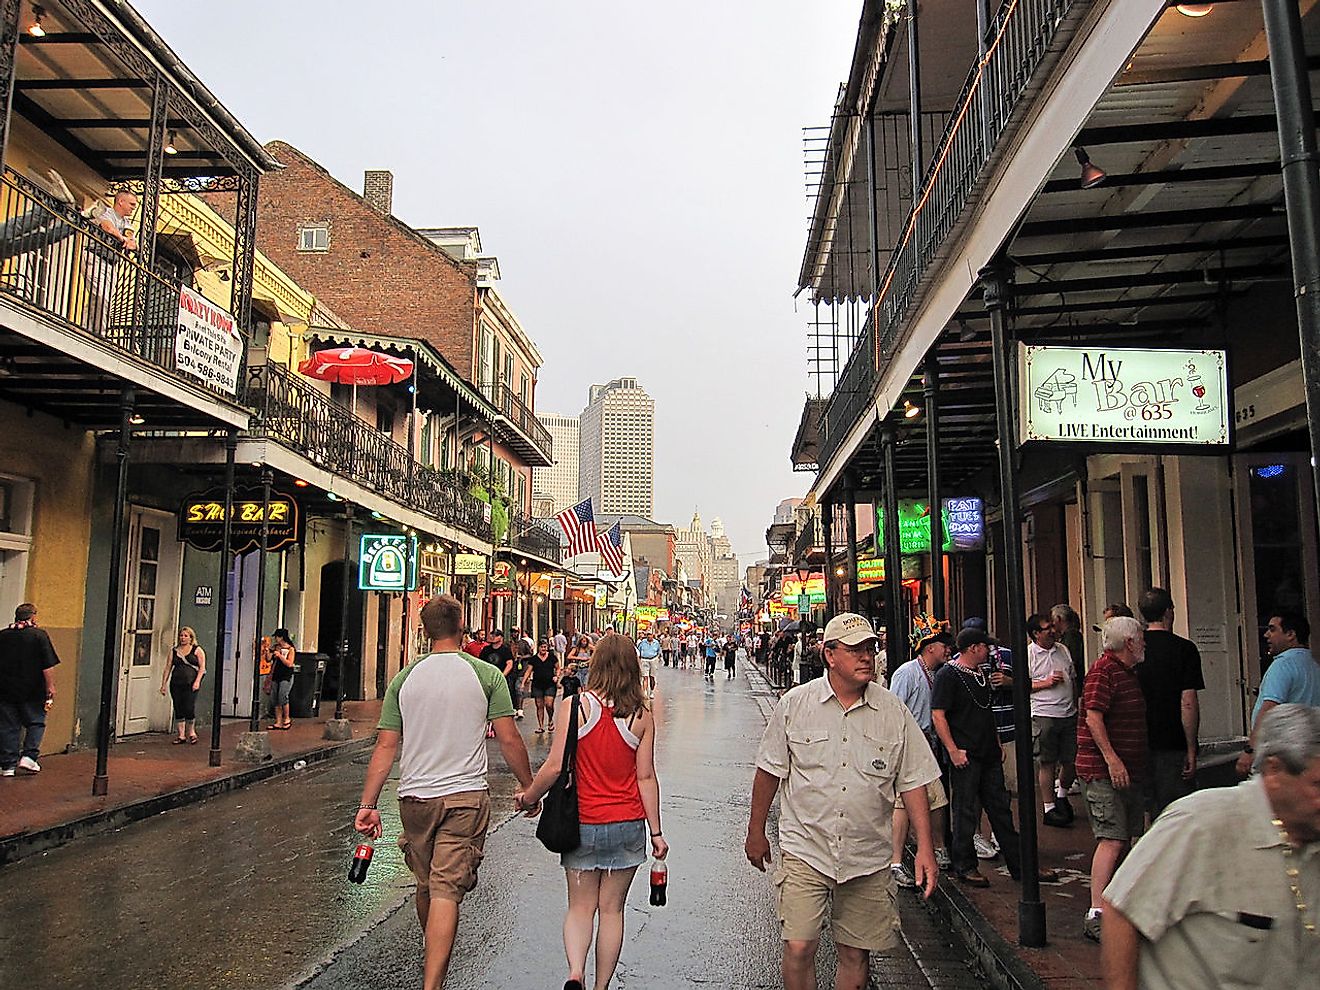 Bourbon Street, looking southwest toward Canal Street, in late afternoon after a shower. Image credit: InSapphoWeTrust/Wikimedia.org